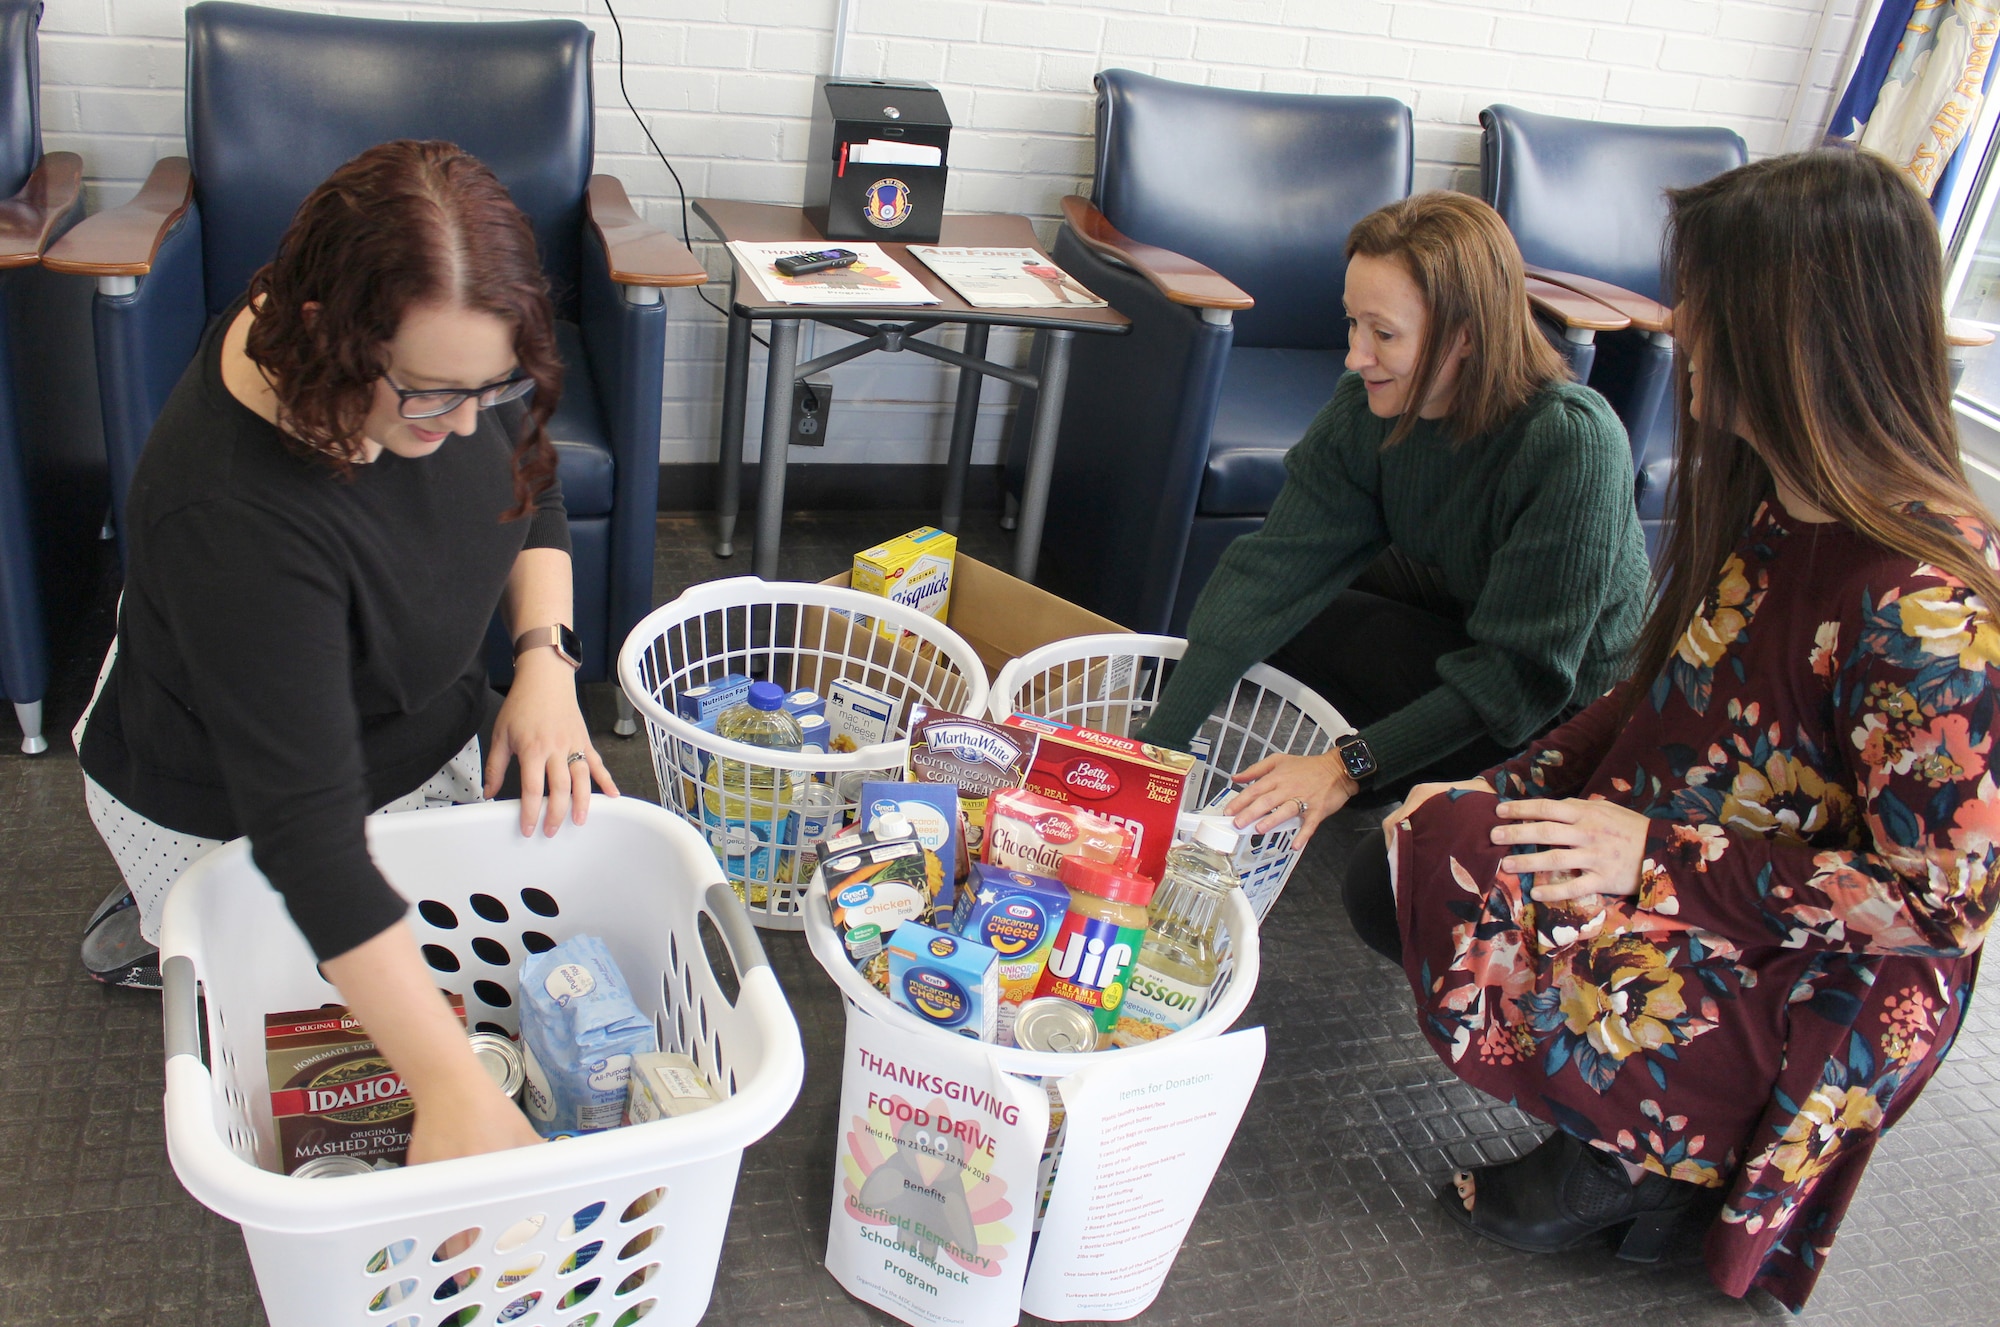 Junior Force Council members Rachel Garrard, Angela Bowden and Leah Lasater pack baskets with food items donated as part of the Thanksgiving Food Basket Program at Arnold Air Force Base. Arnold JFC members collected enough items for more than 30 food baskets for Coffee County families in need of Thanksgiving meals. (U.S. Air Force photo by Deidre Moon)